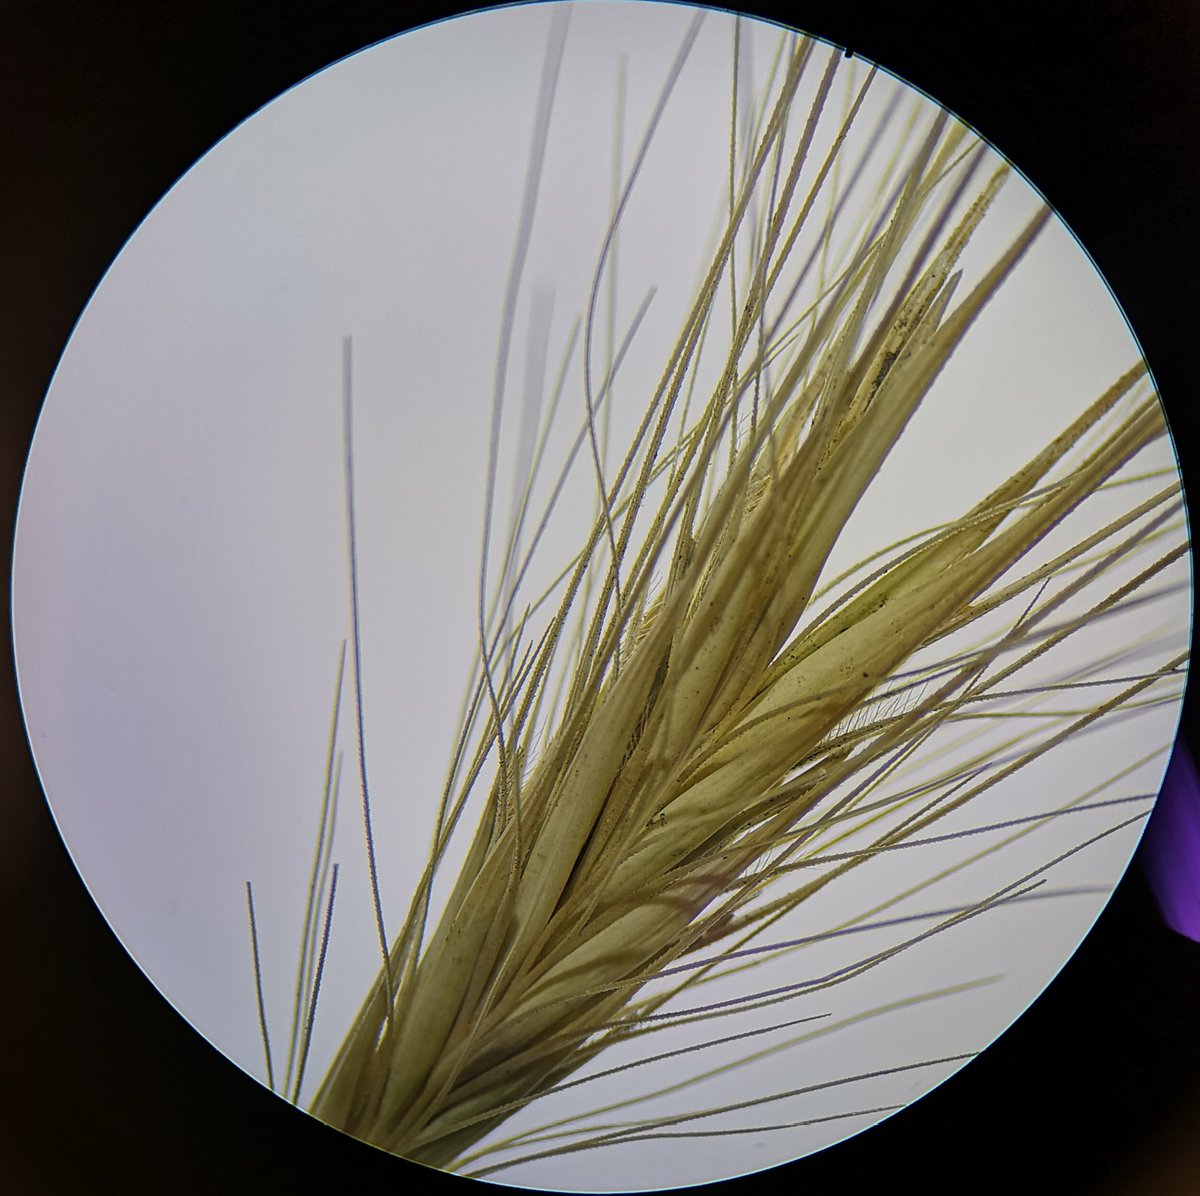 Looking at how to ID grass tribes by looking at their spiklets: L- R Yorkshire Fog (Holcus lanatus), Annual Meadow Grass (Poa annua), Crested Dogs-tail (Cynosurus cristatus), Wall Barley (Hordeum murinum) #MScSISS #MScPlDiv @drmgoeswild